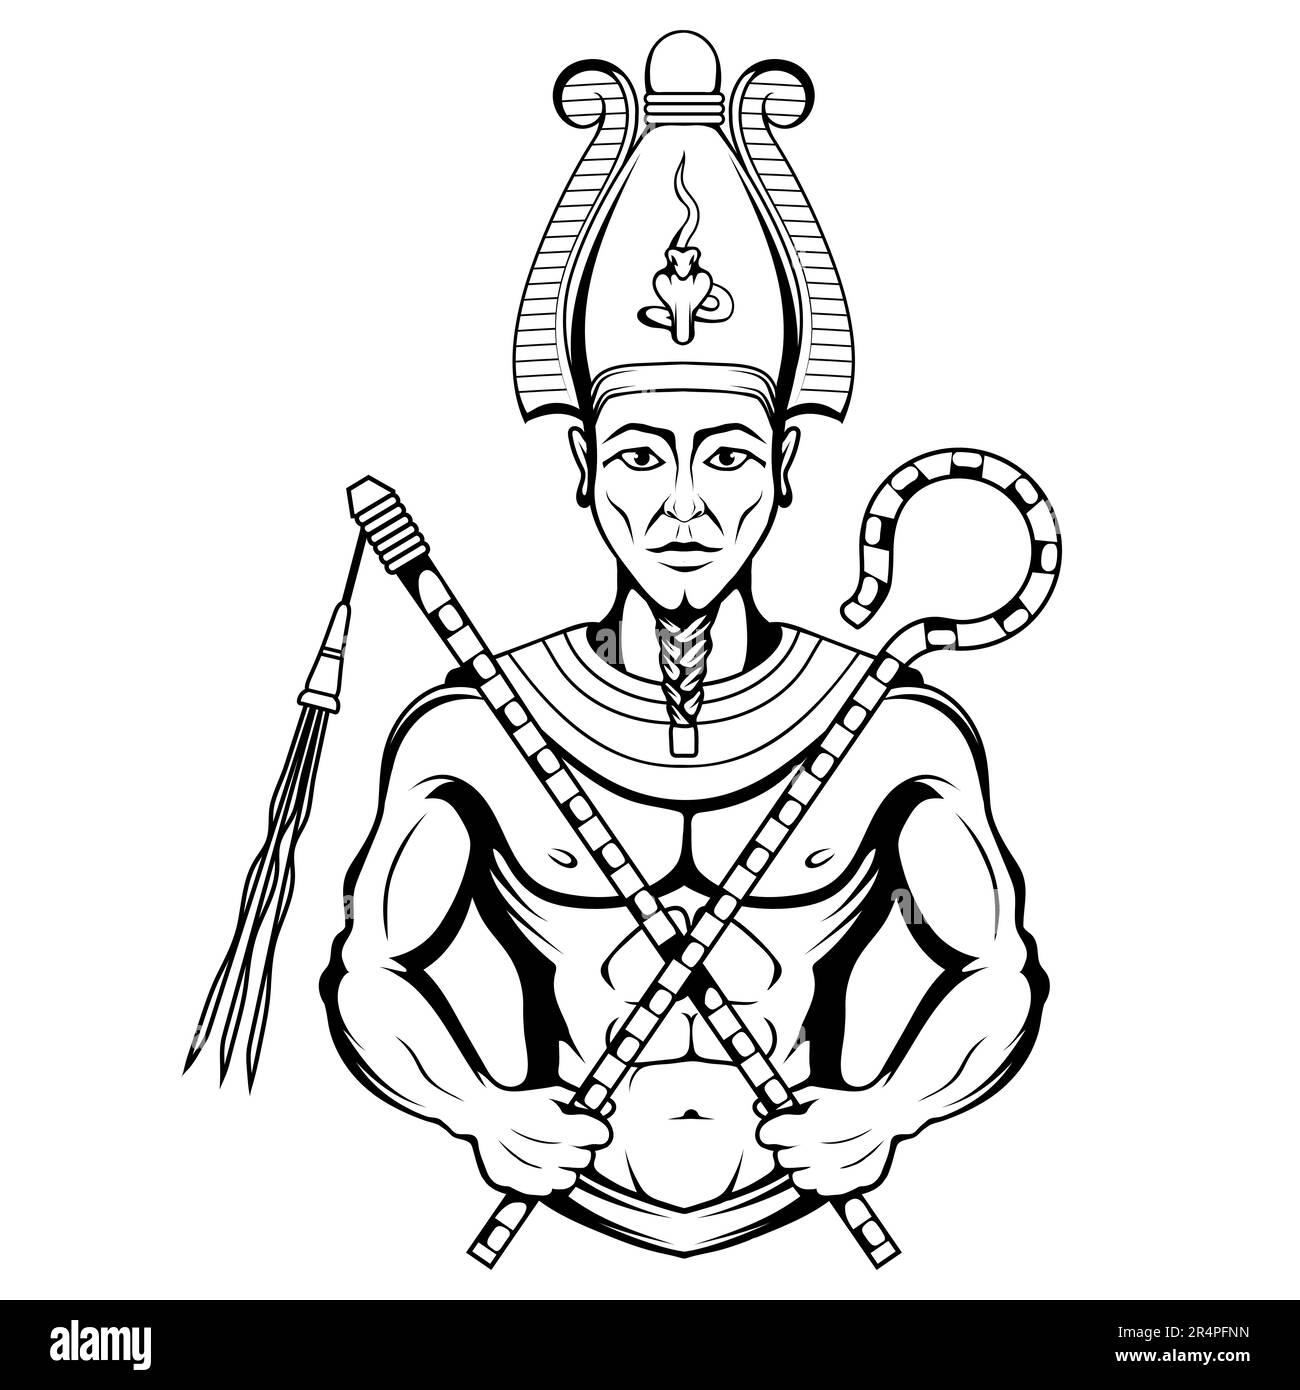 Osiris. Vector illustration of a sketch ancient egyptian god lord of the dead and reborn with green skin holds symbols of power in his hands Stock Vector